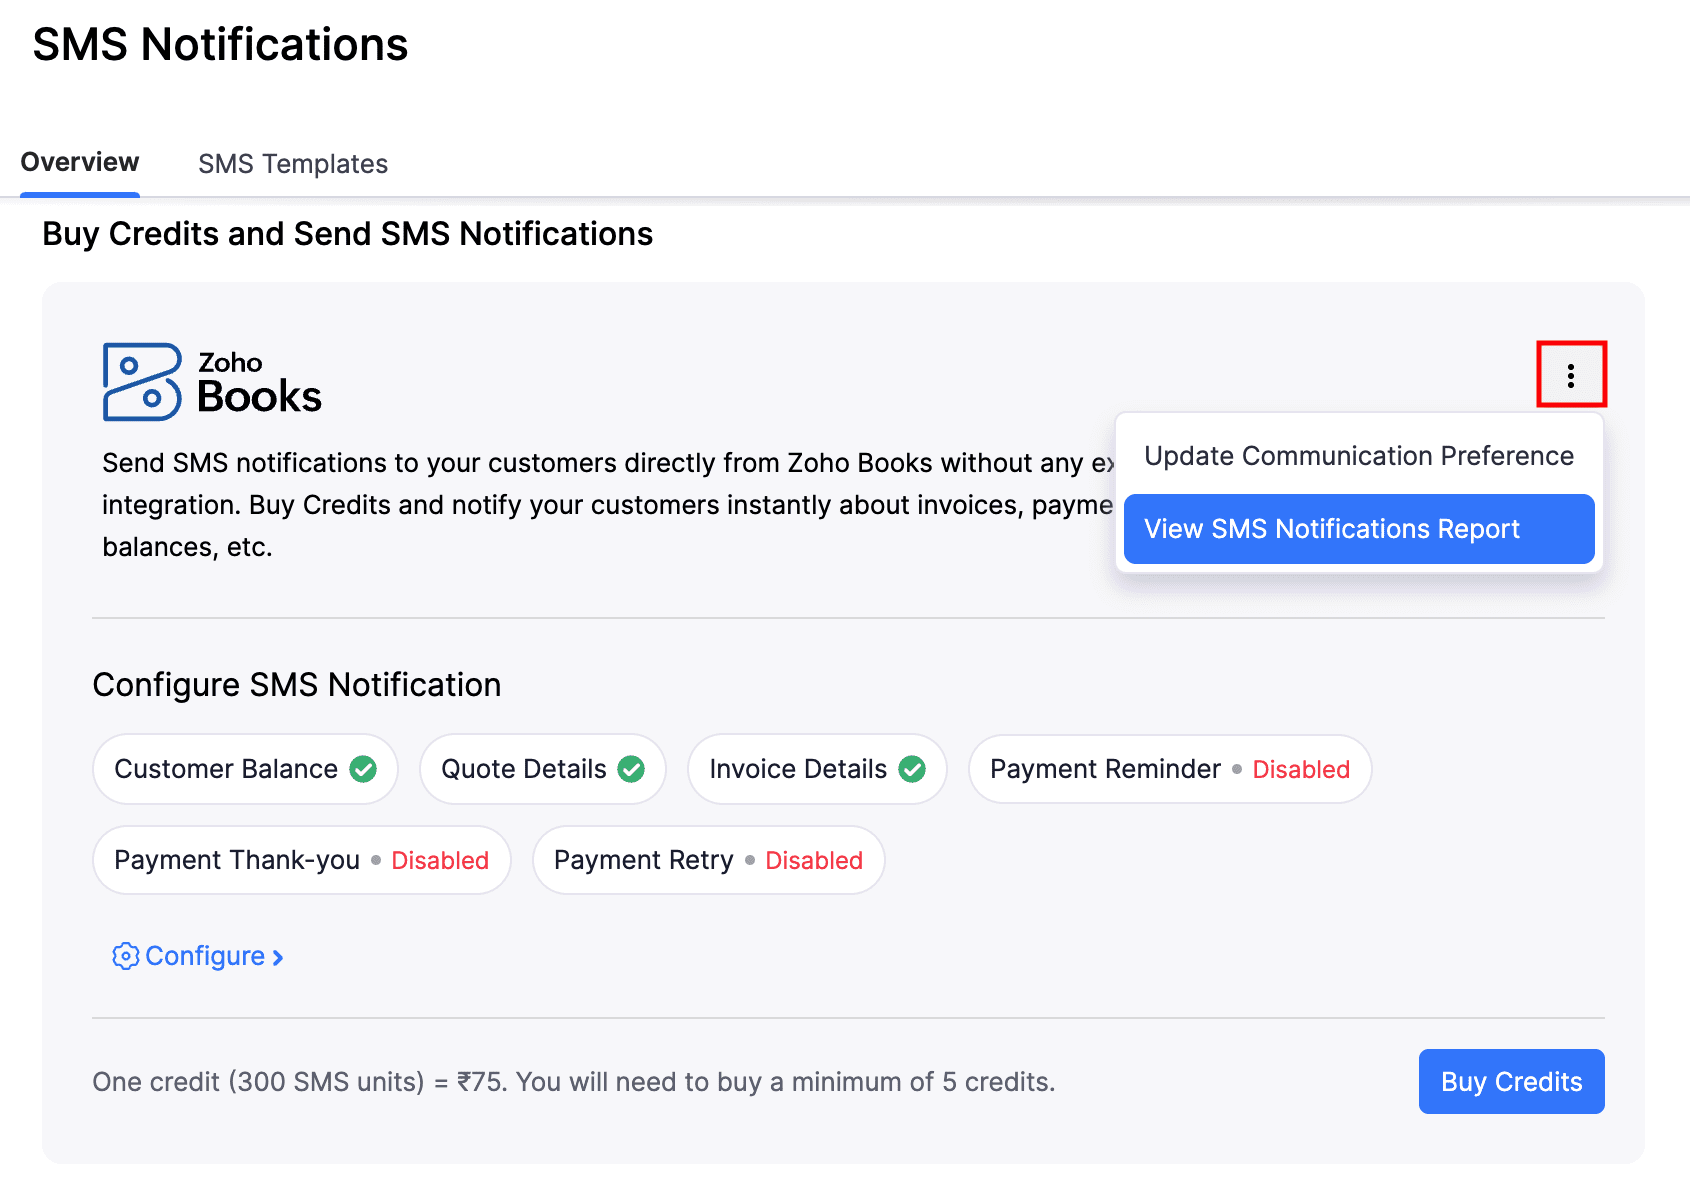 View SMS Notifications Report